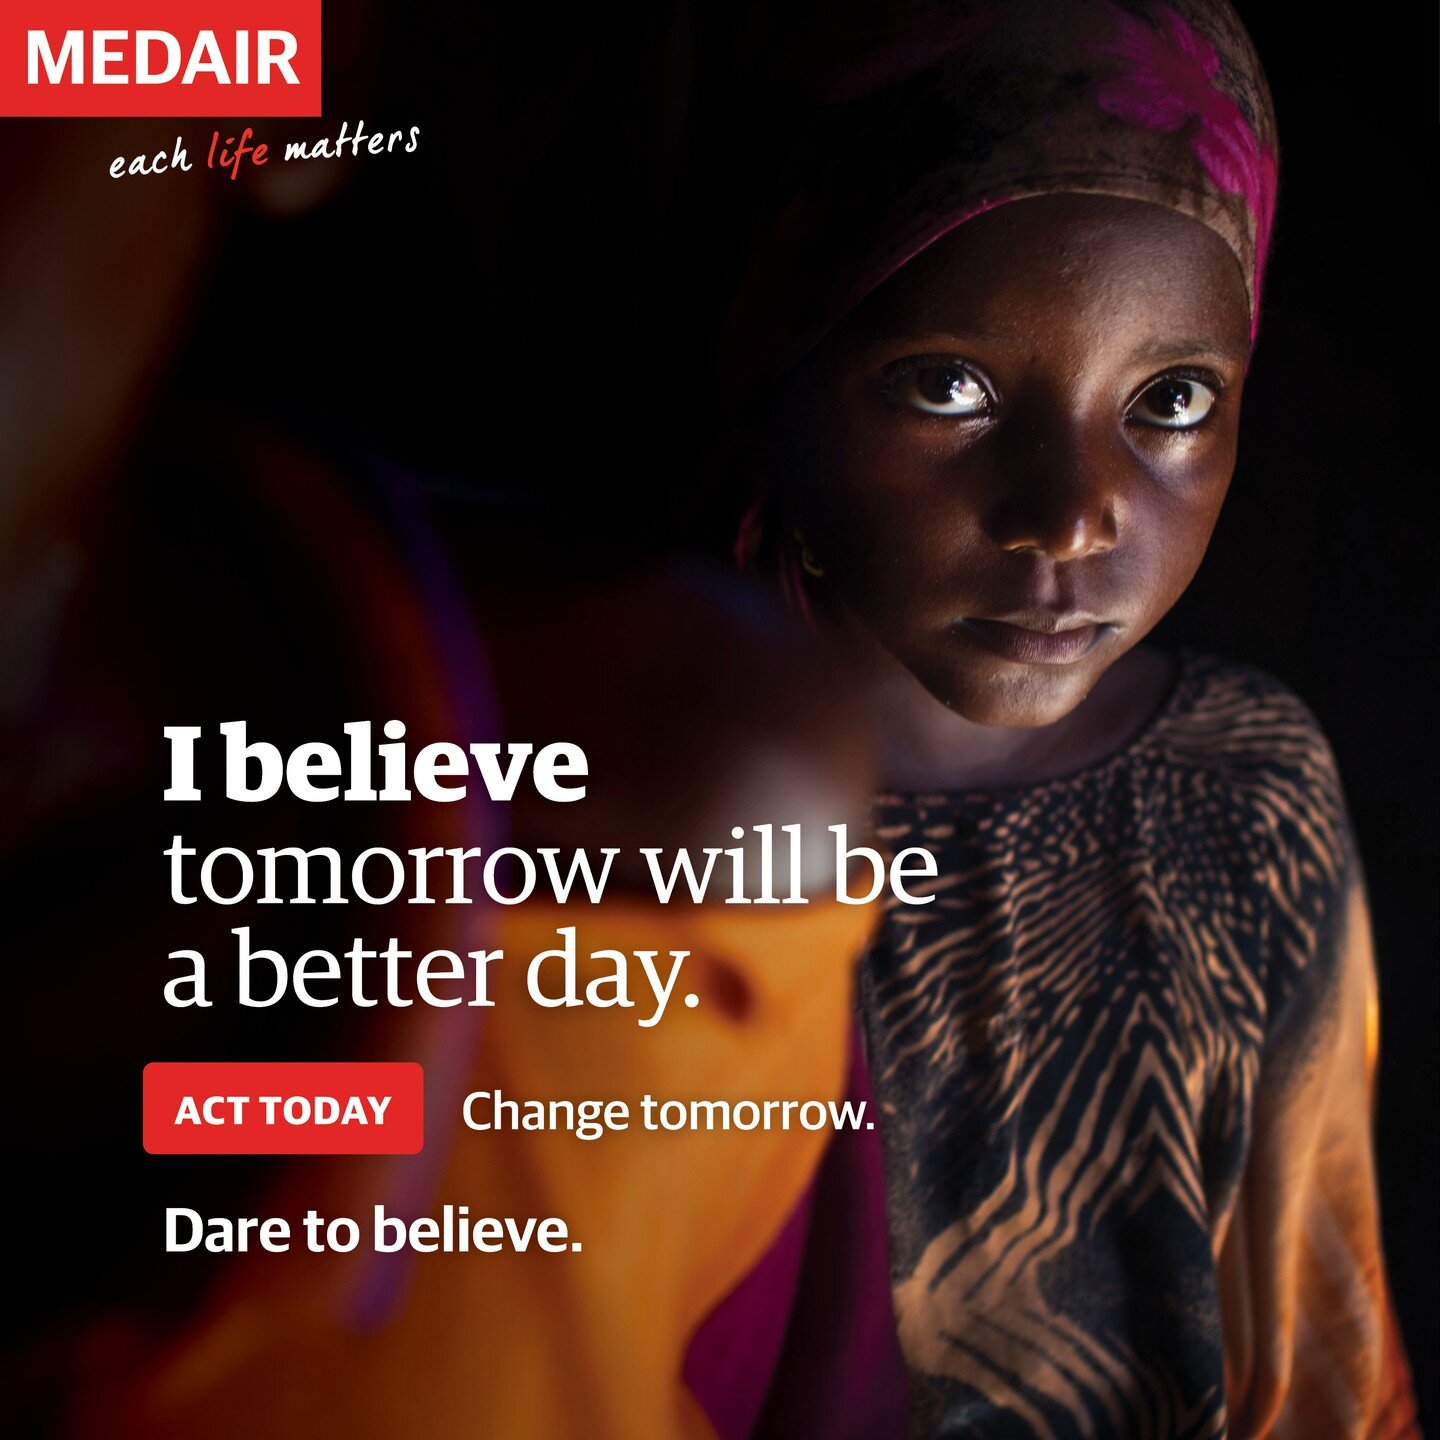 Act today. Change tomorrow.&nbsp;www.medair.org. A meaningful collaboration with&nbsp;@medairint&nbsp;on their 2021 year-end campaign that invites you to join them in hope - that tomorrow will be a better day. Medair provides crucial emergency aid to